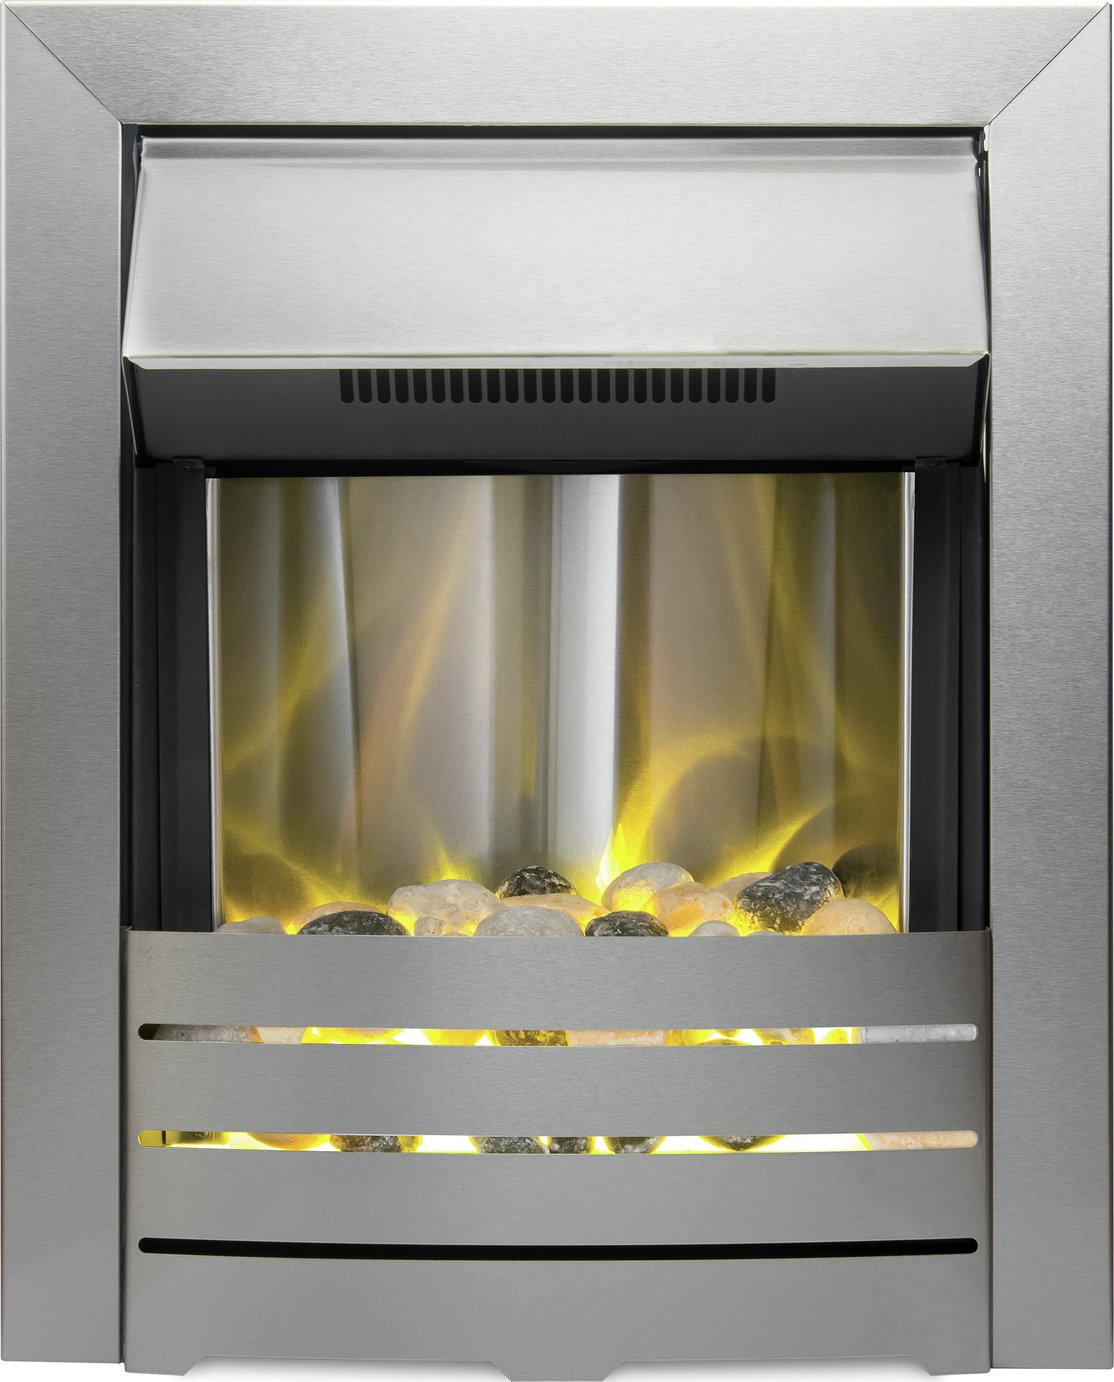 Adam Helios Electric Inset Fire - Brushed Steel